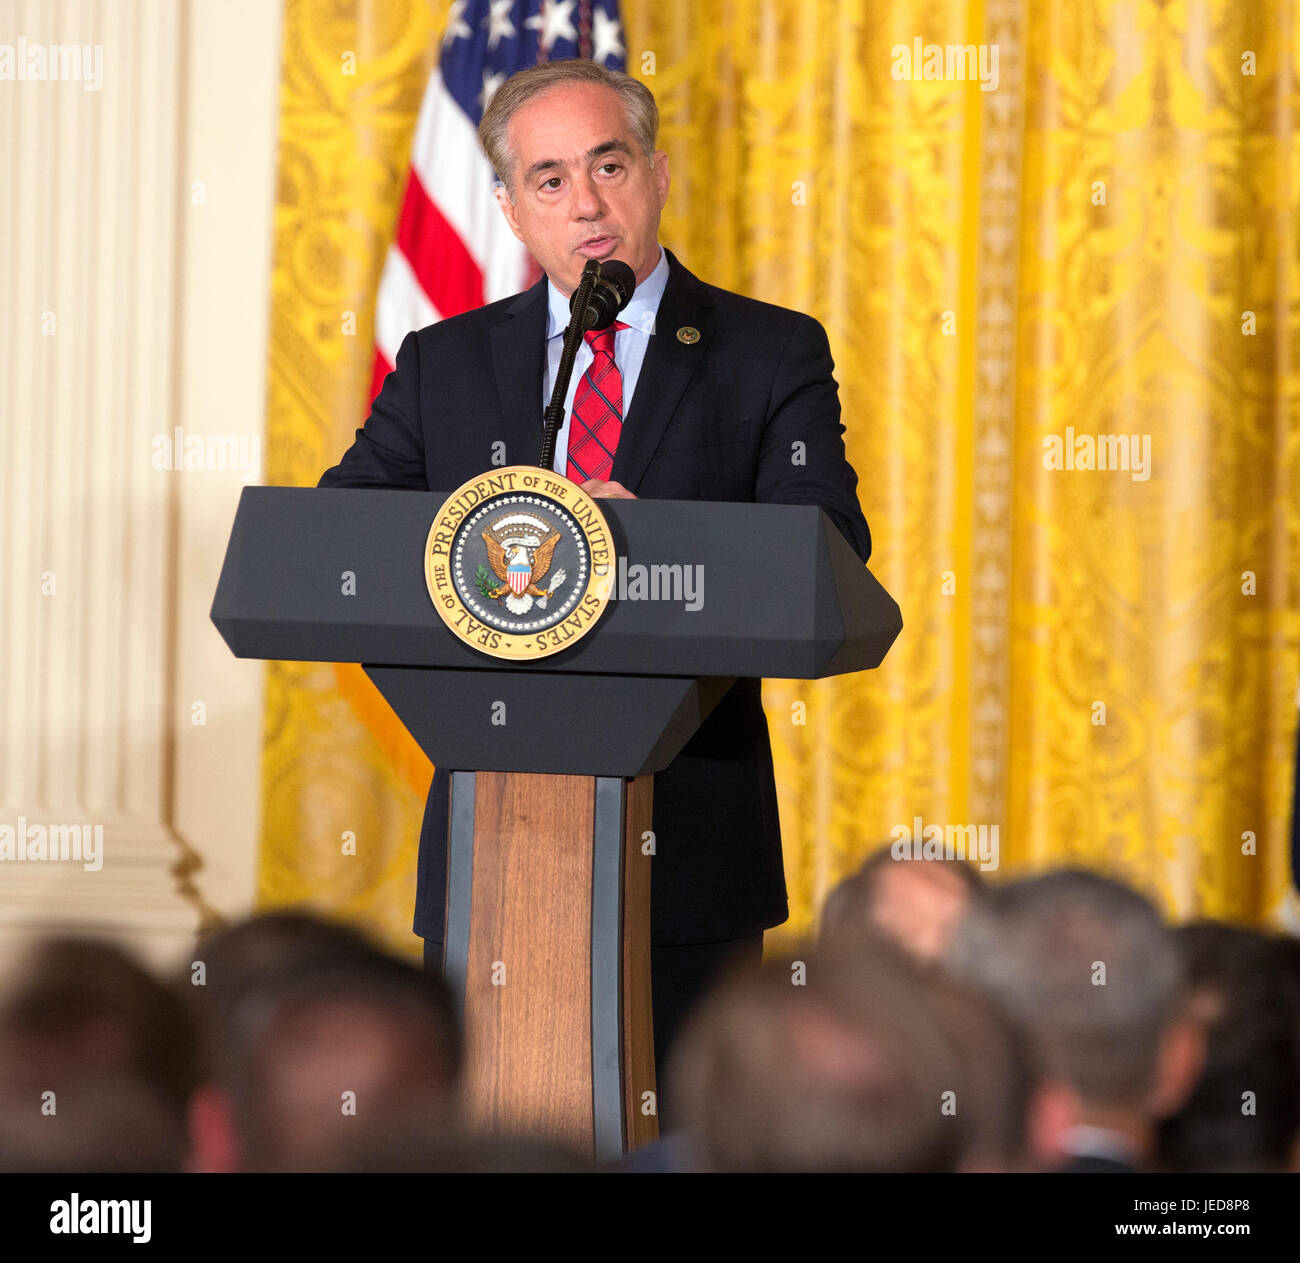 United States Secretary of Veterans Affairs Dr. David Shulkin speaks at the signing of the Department of Veterans Affairs Accountability and Whistleblower Protection Act of 2017 at The White House in Washington, DC, June 23, 2017. Credit: Chris Kleponis/CNP /MediaPunch Stock Photo